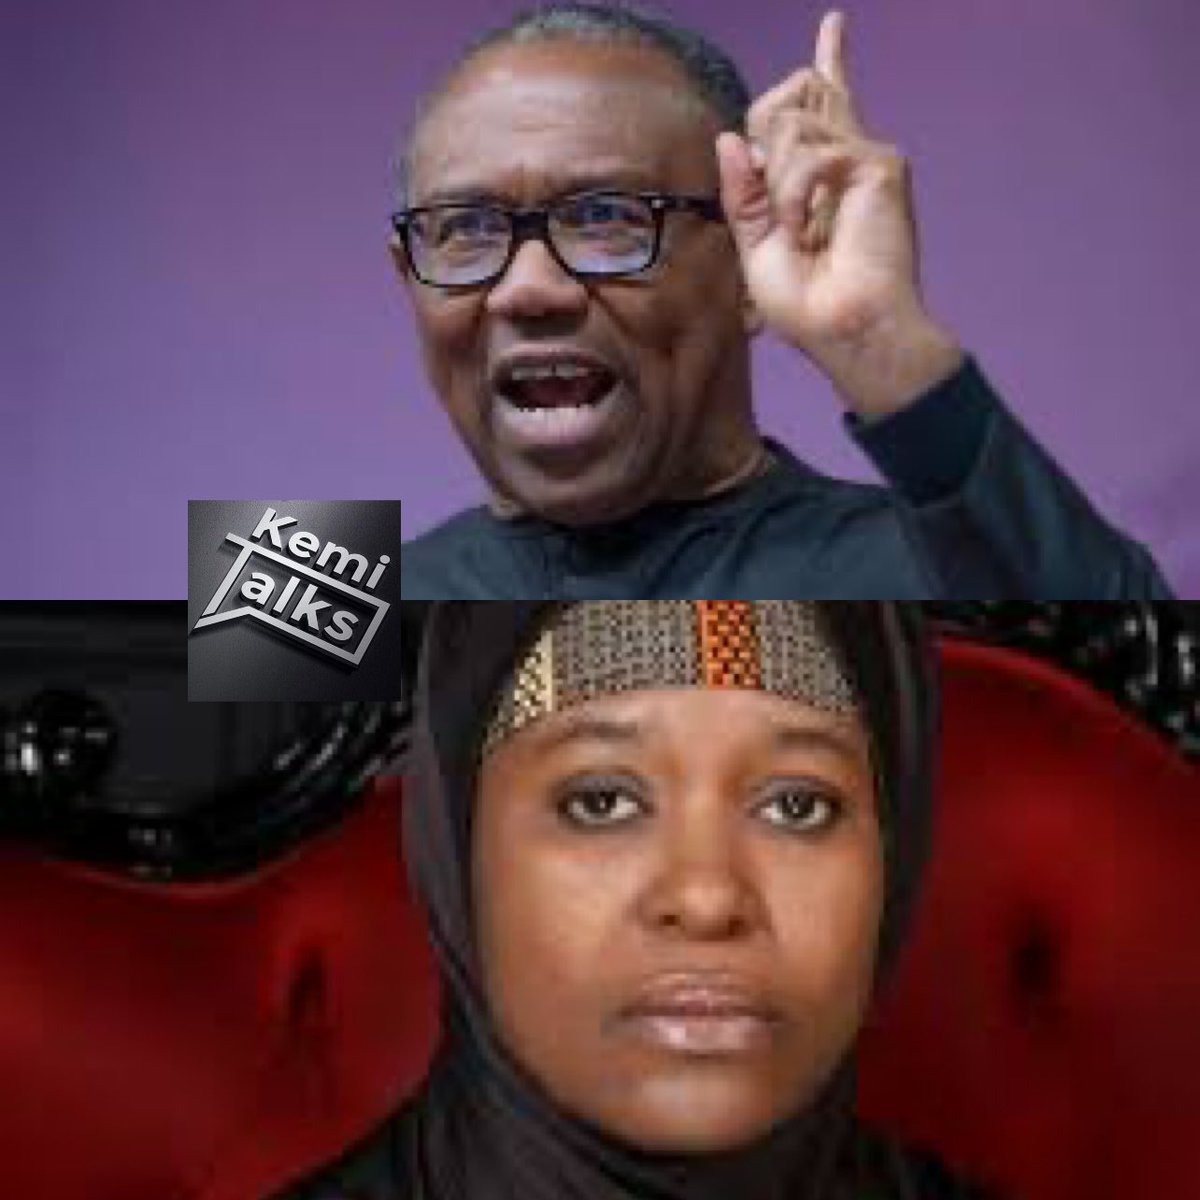 If it were Peter Obi who changed our National anthem, this hijab 🧕 wearing bitch will stand up ON THAT TABLE to sing 🎤 it. Hypocrisy at its highest level. 

#Kemitalks